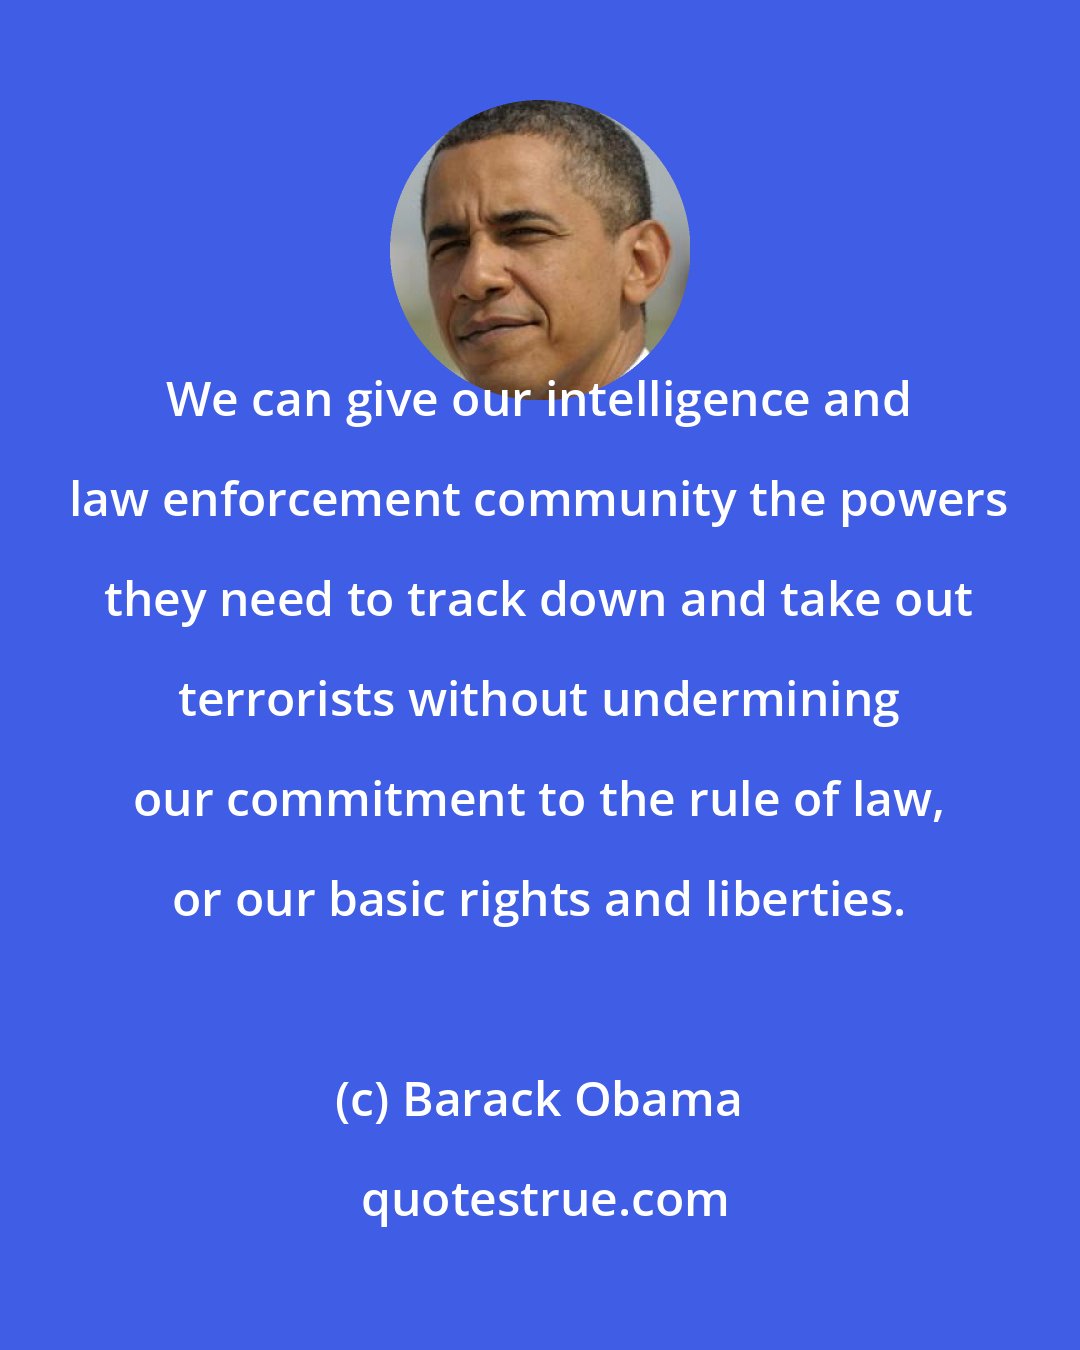 Barack Obama: We can give our intelligence and law enforcement community the powers they need to track down and take out terrorists without undermining our commitment to the rule of law, or our basic rights and liberties.